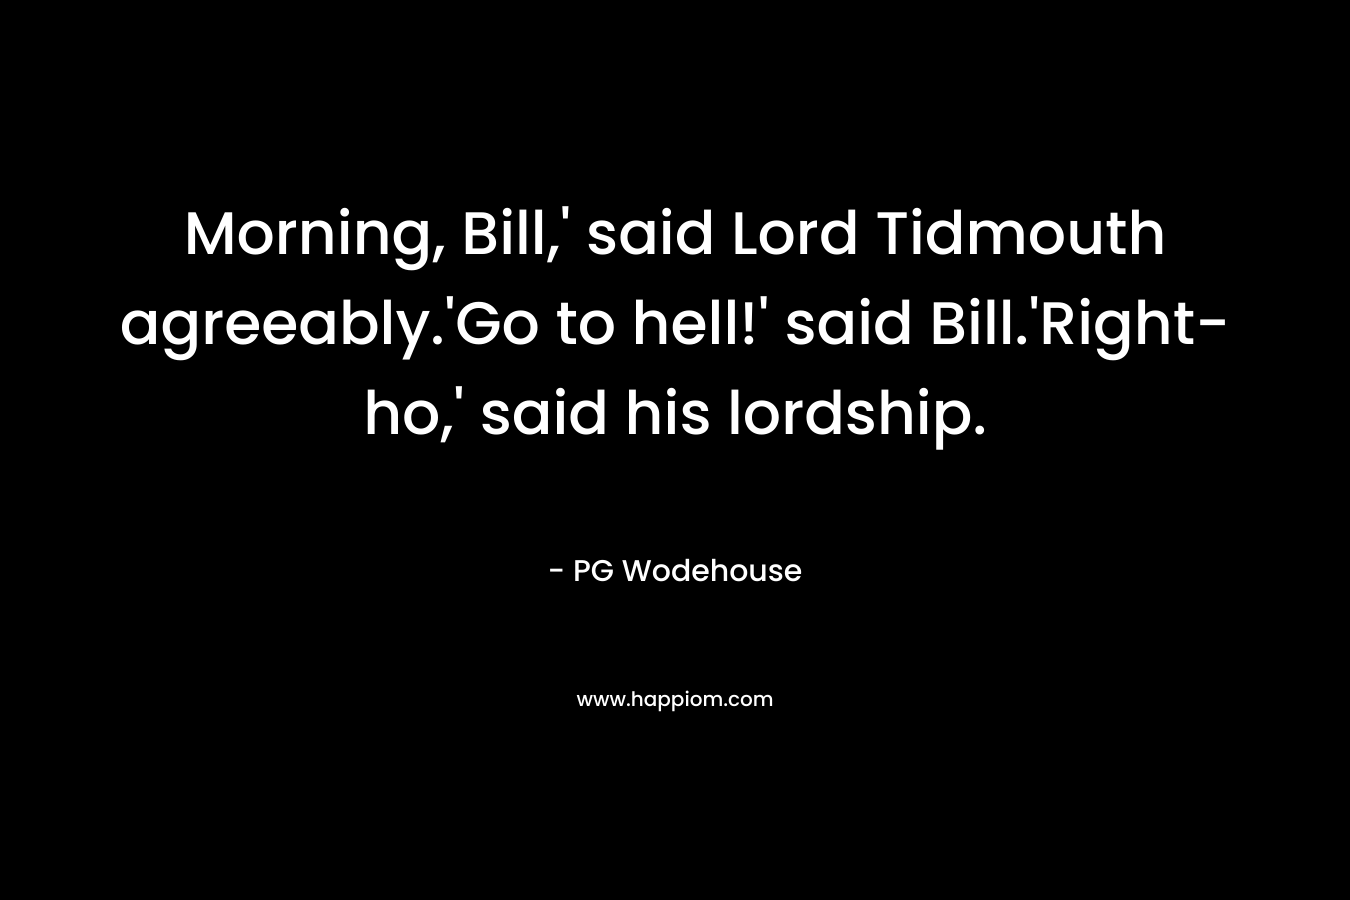 Morning, Bill,' said Lord Tidmouth agreeably.'Go to hell!' said Bill.'Right-ho,' said his lordship.